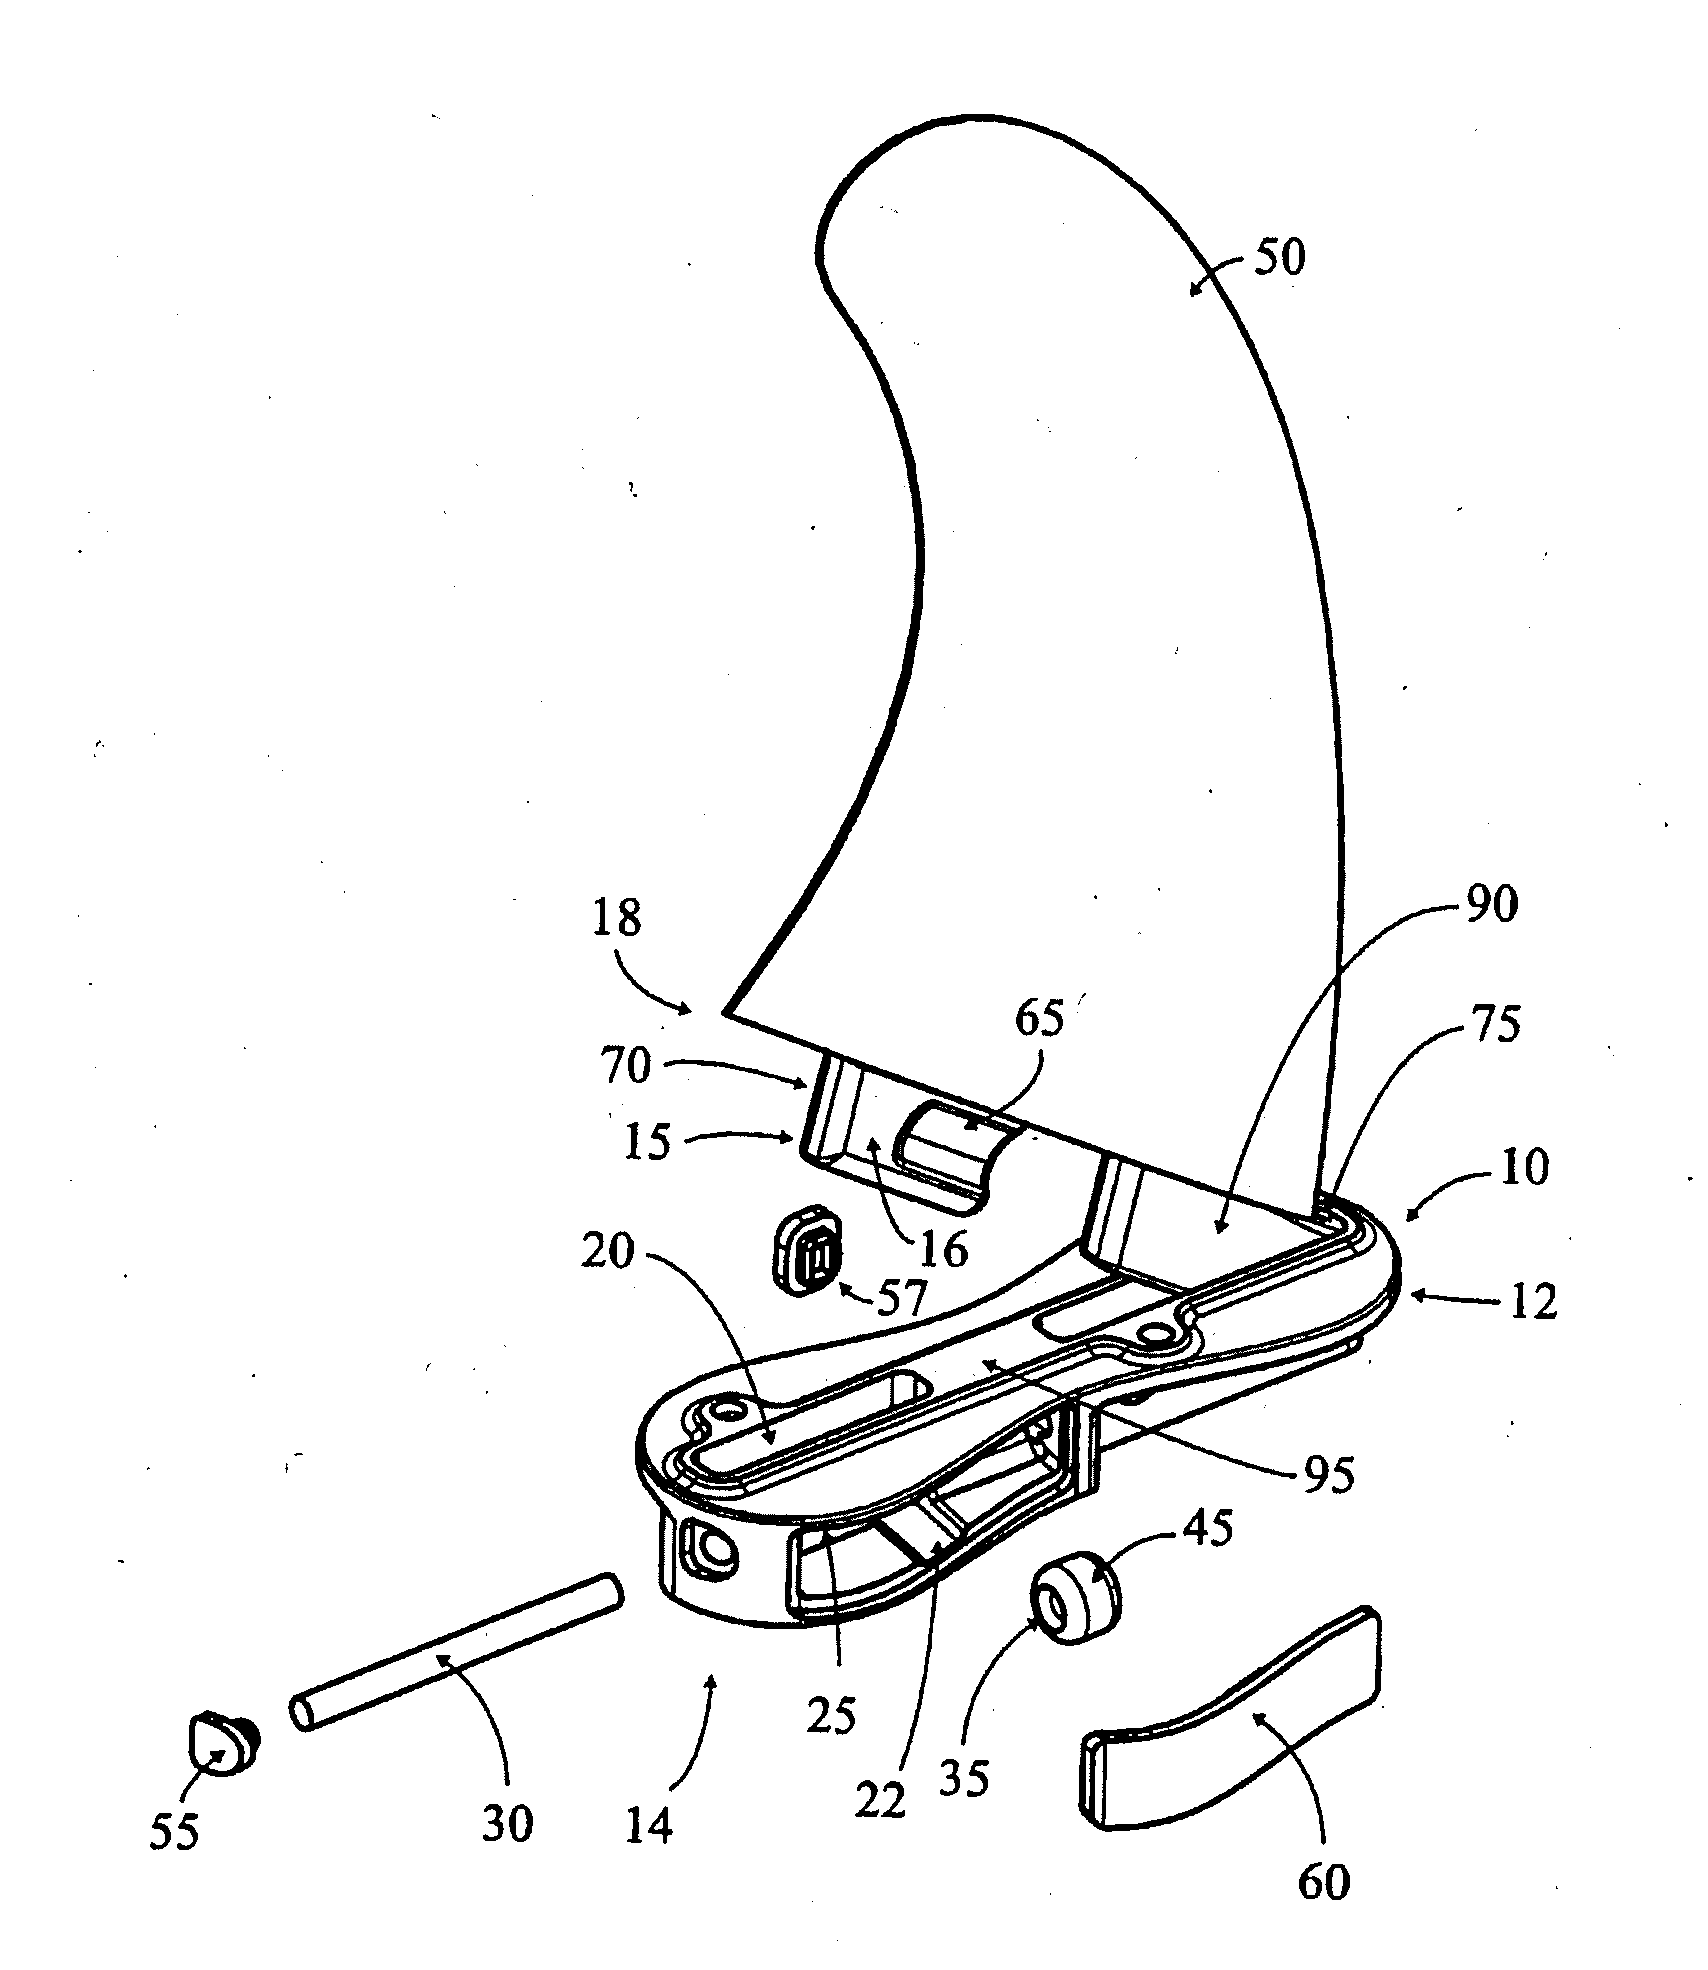 Fin plug for water craft